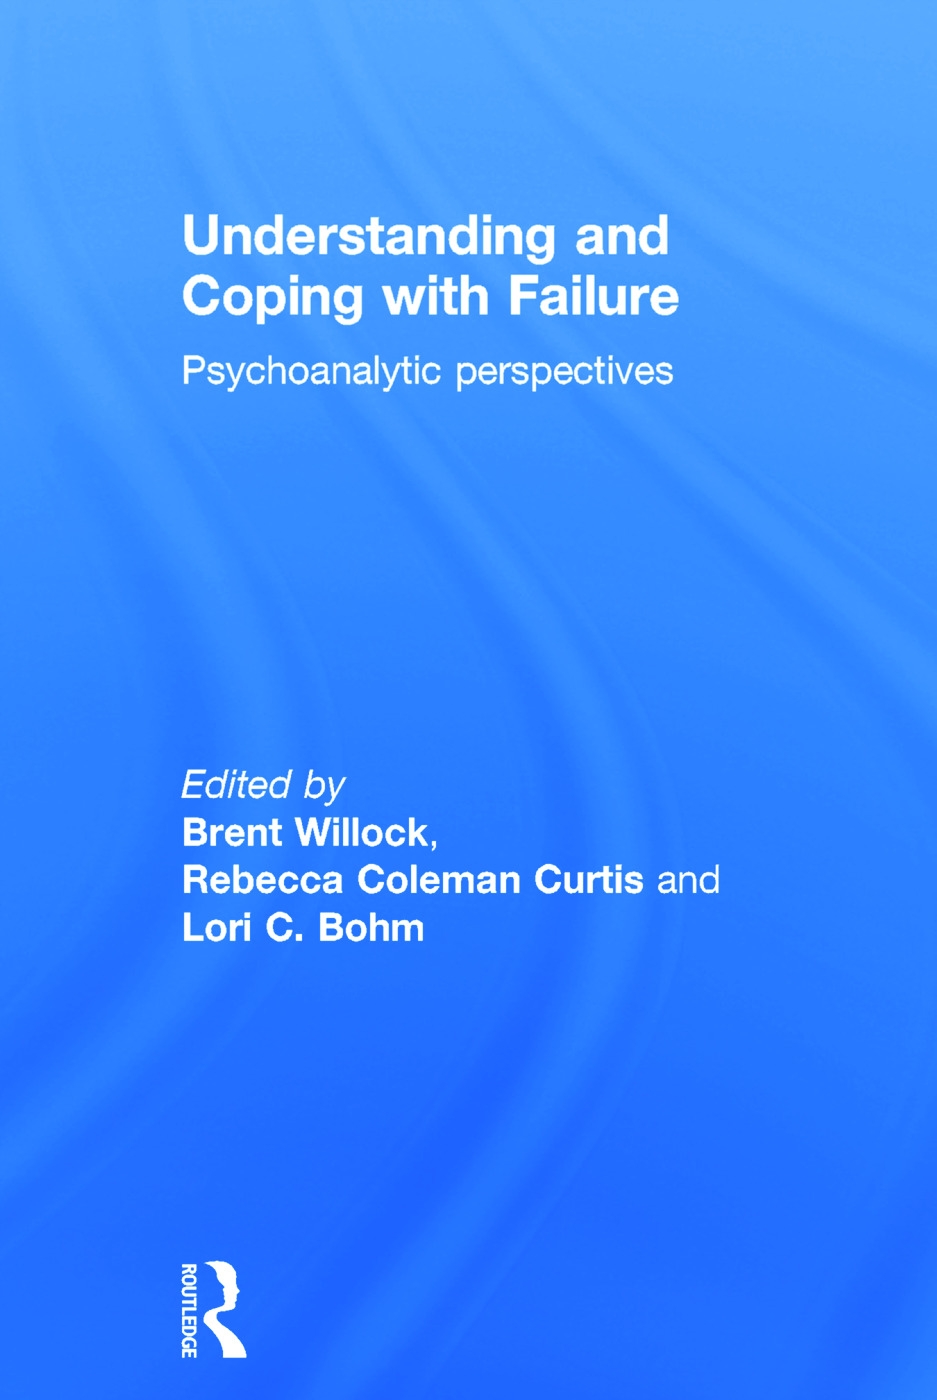 Understanding and Coping With Failure: Psychoanalytic Perspectives